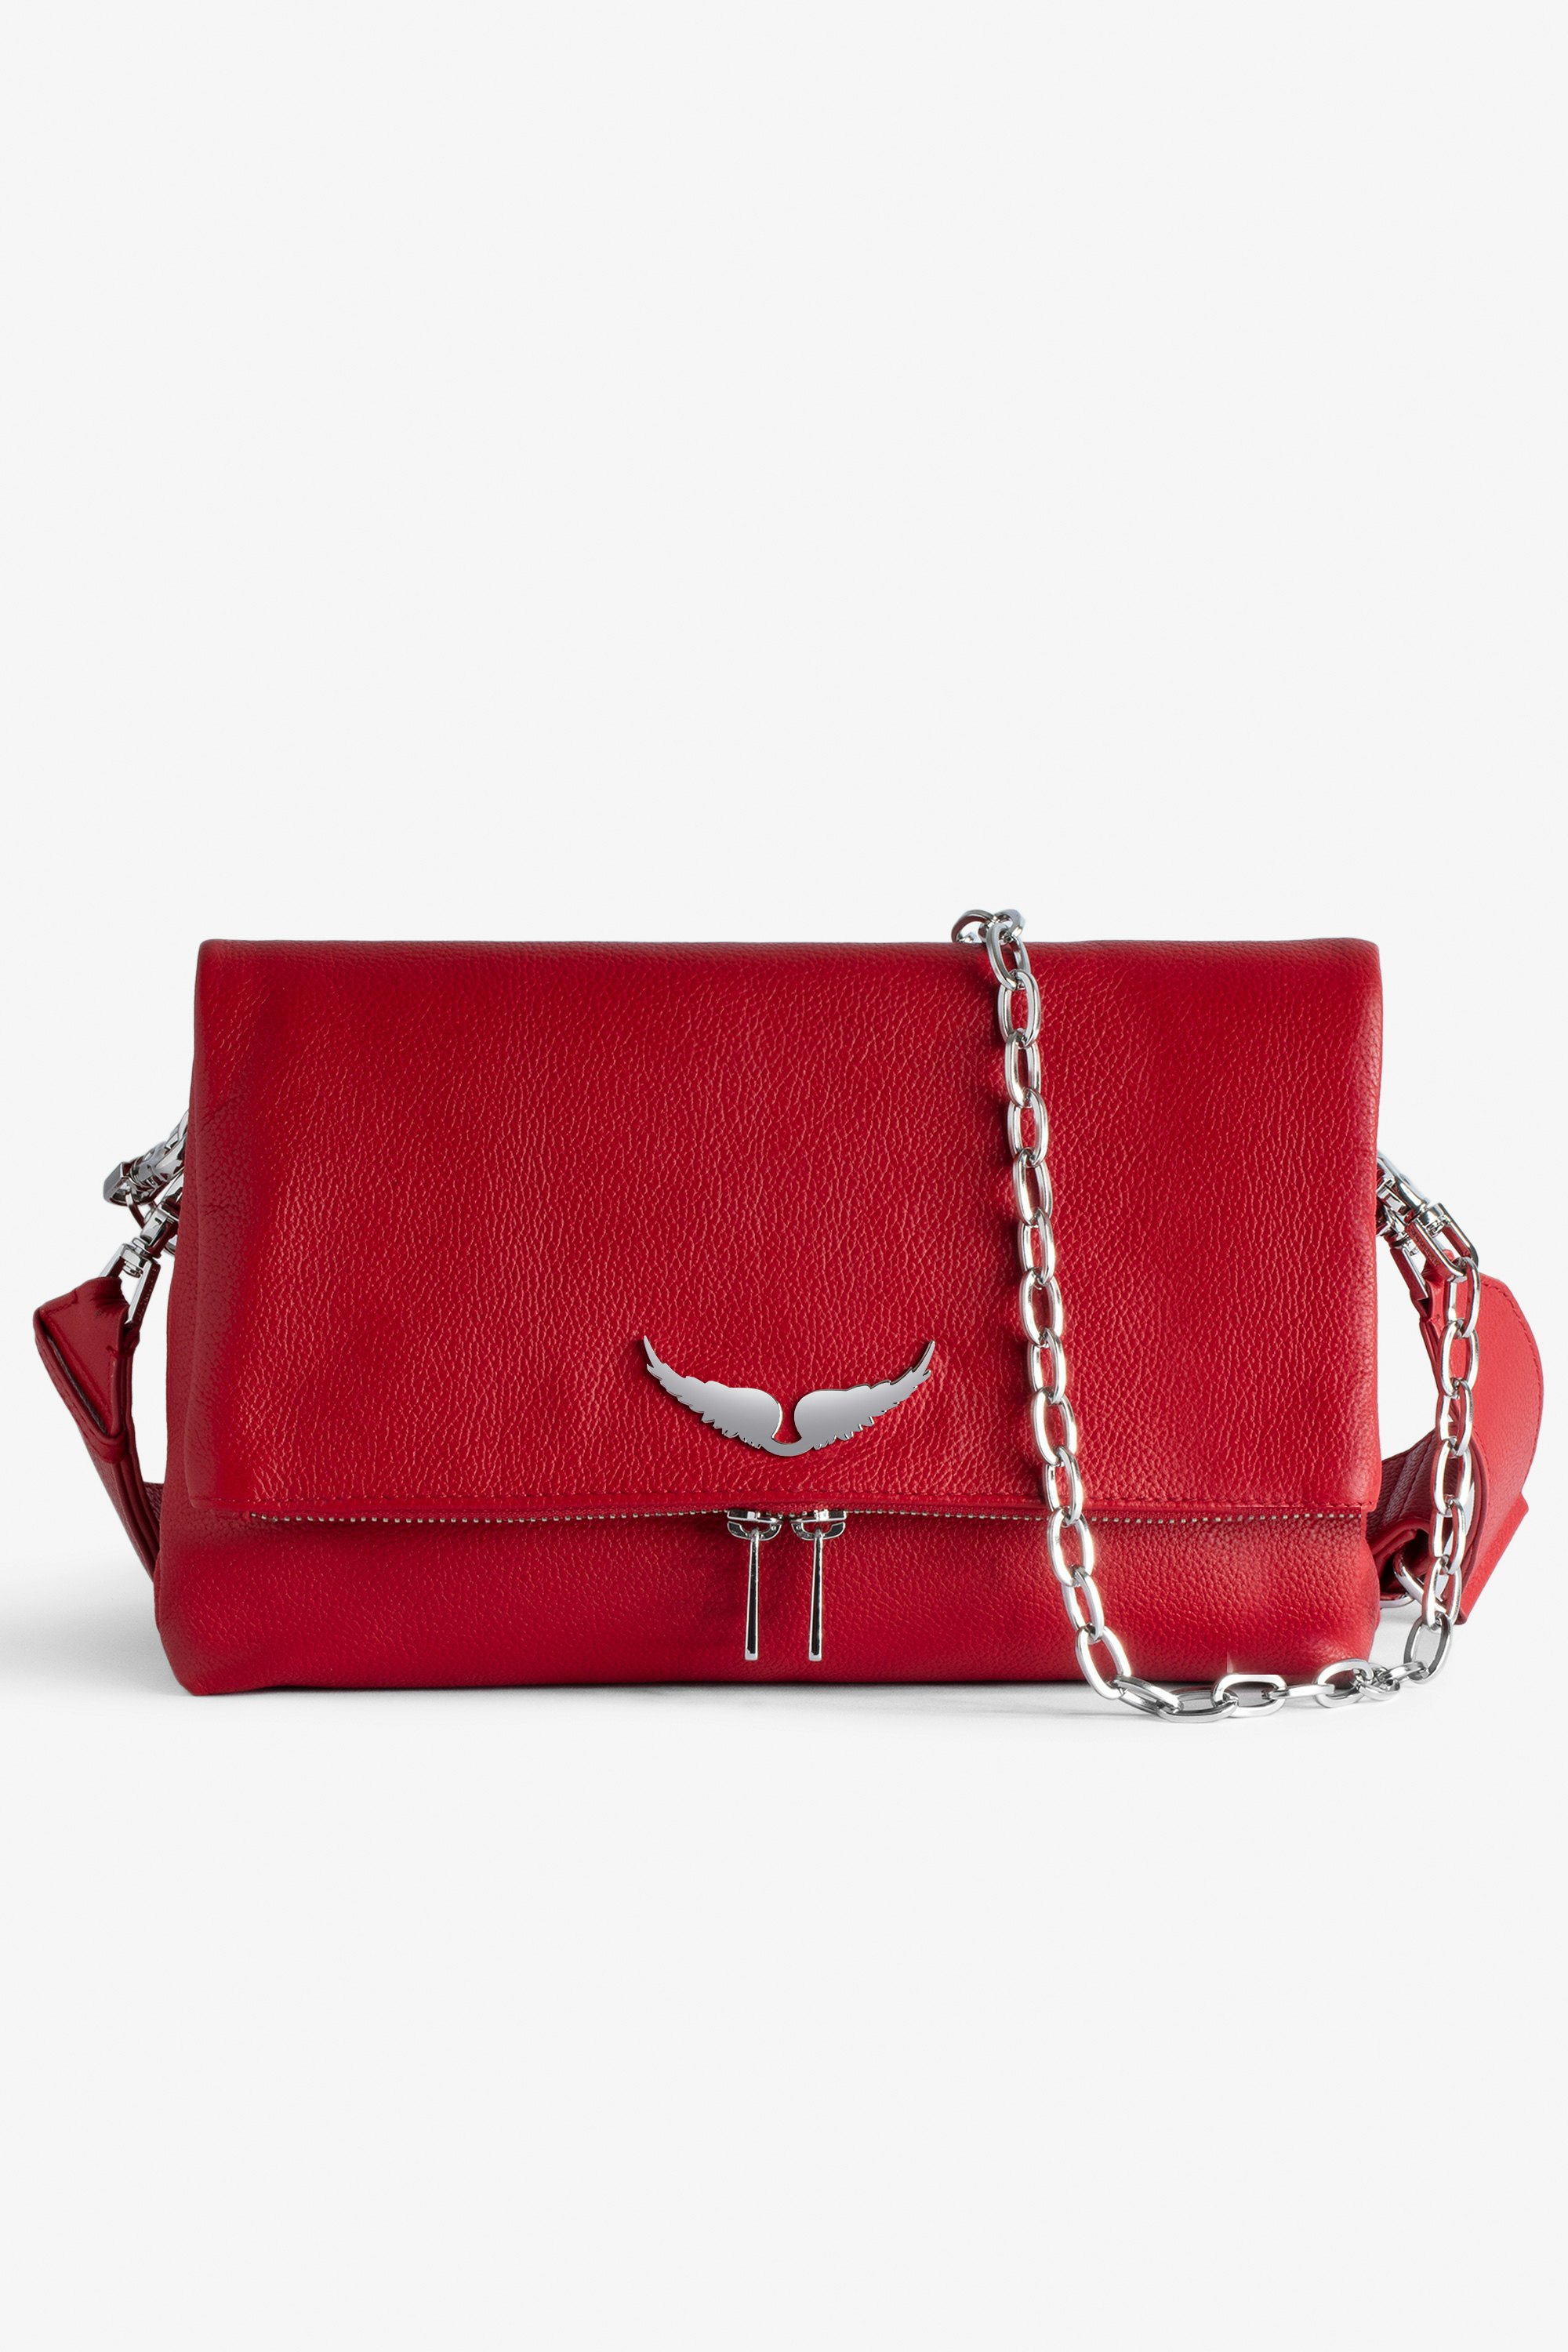 Rocky バッグ - Women’s red grained leather bag with shoulder strap and wings charm